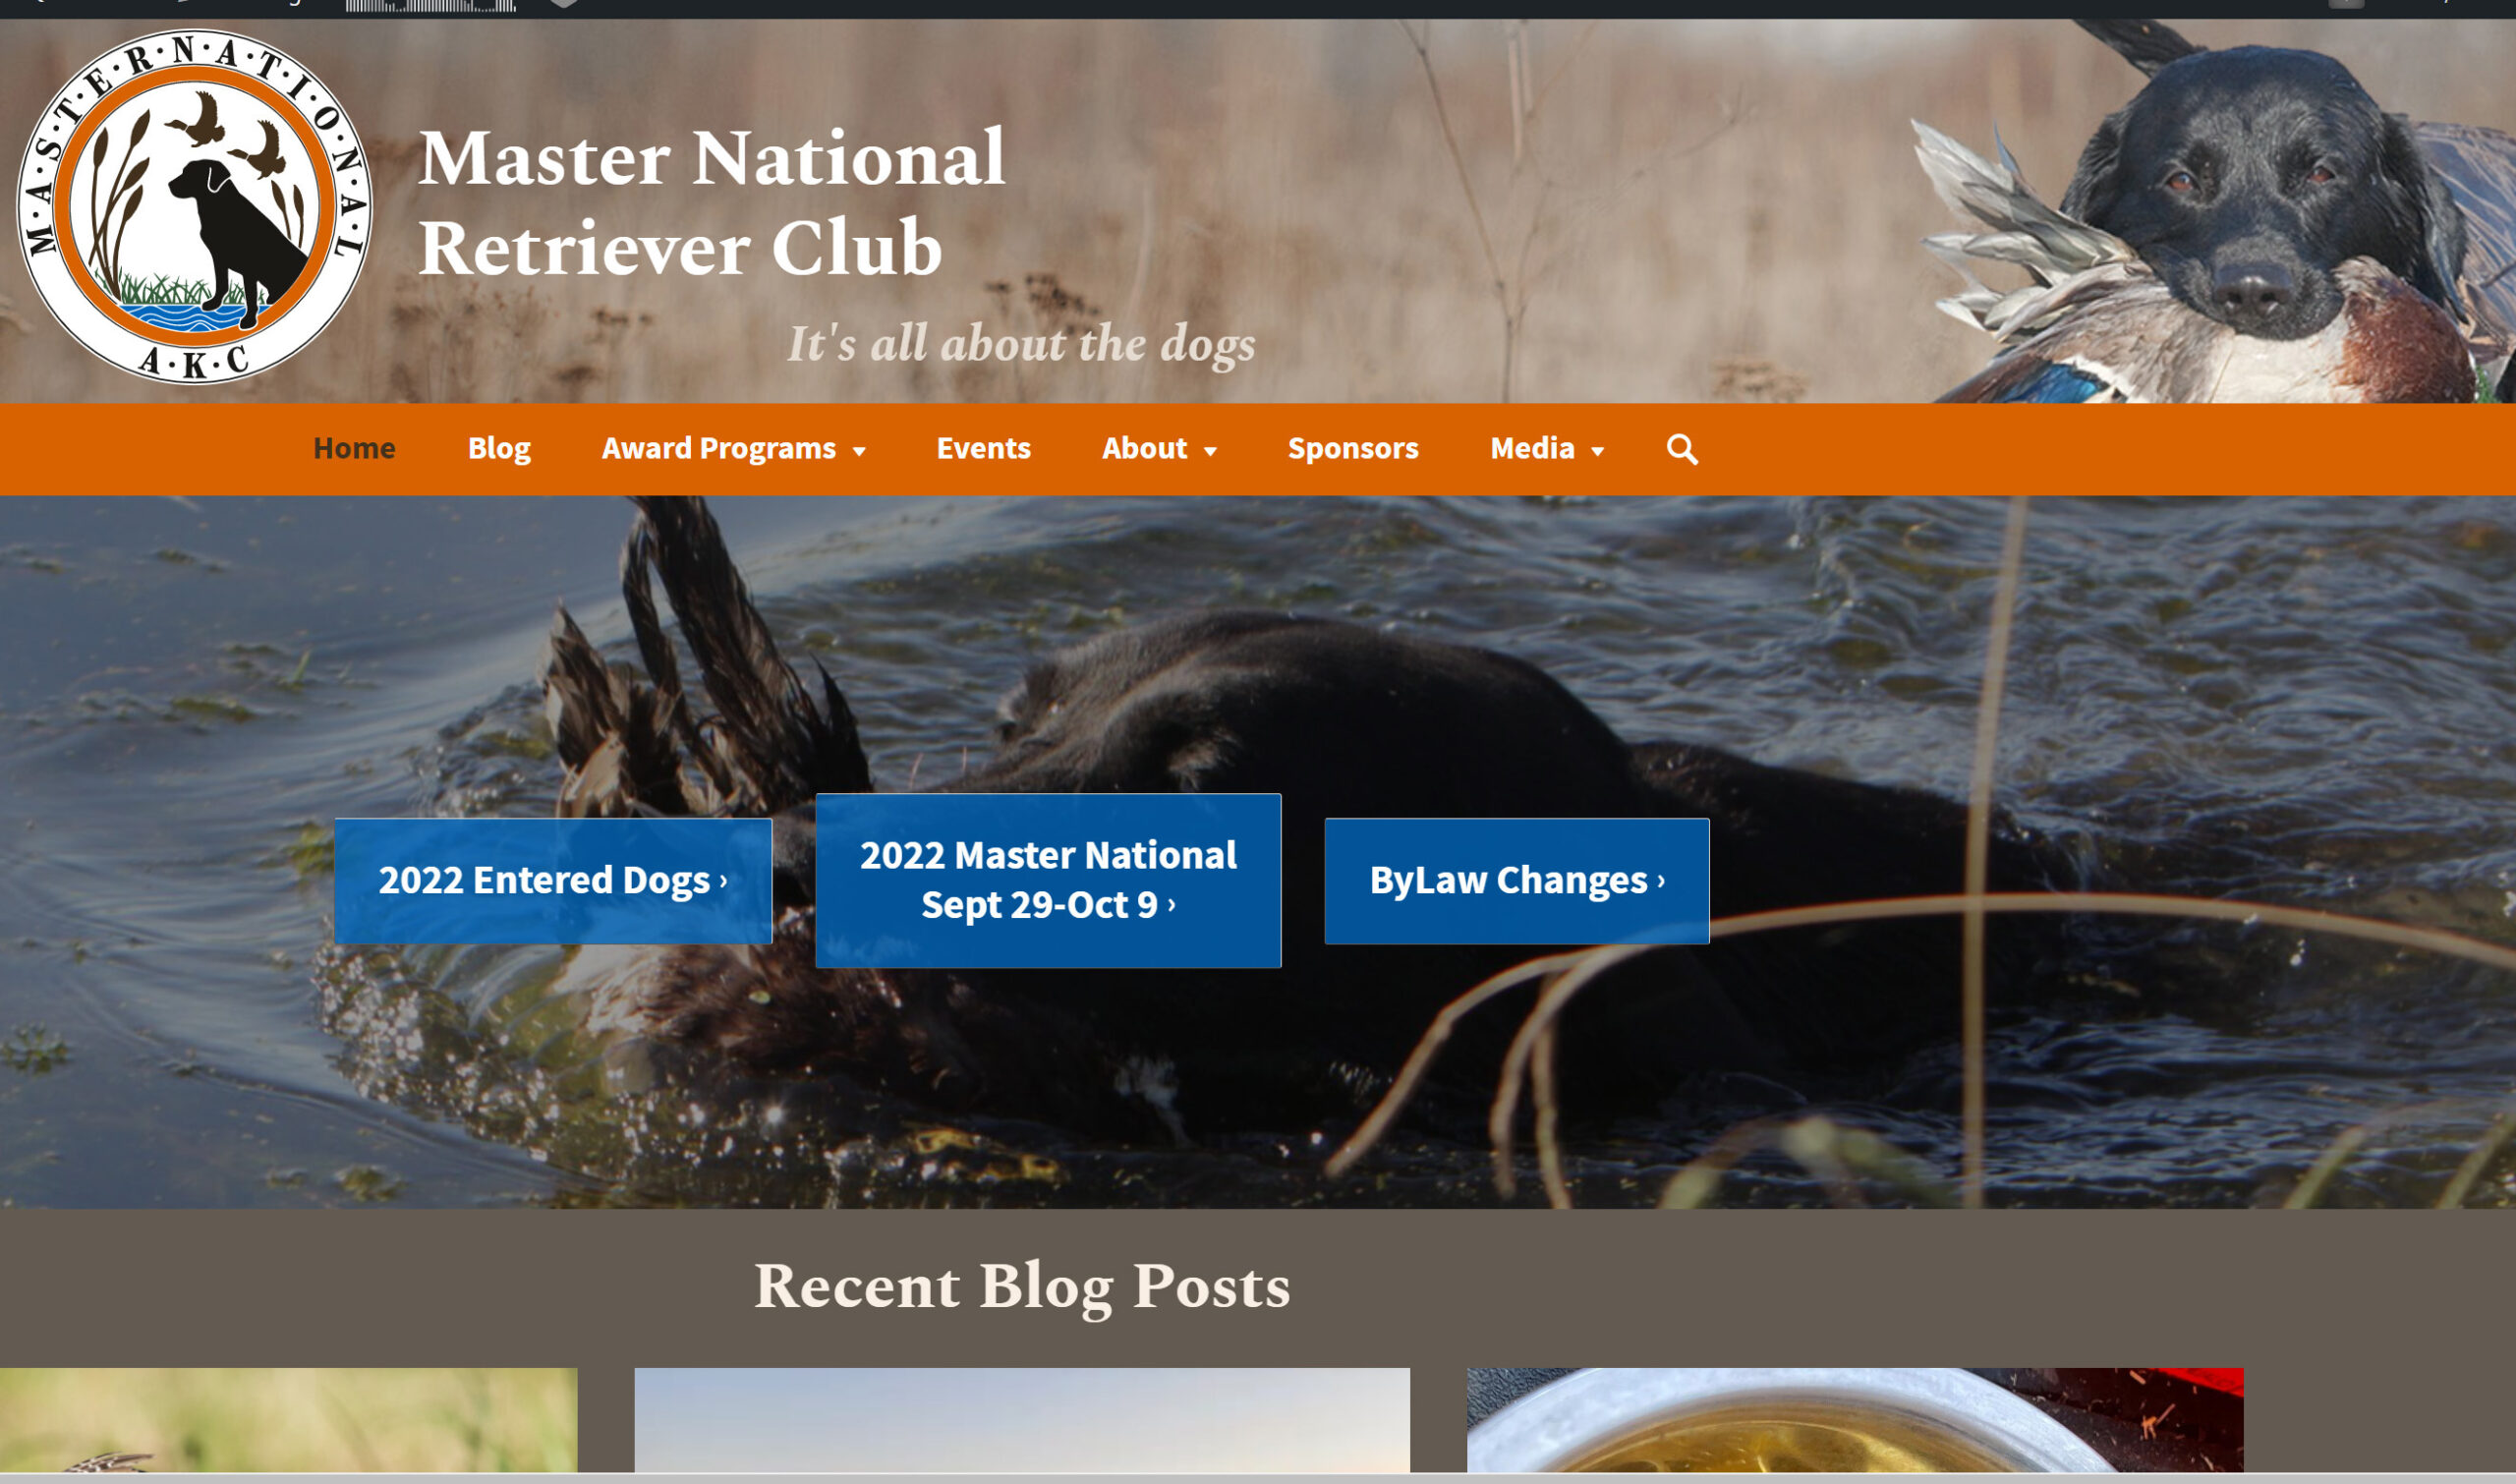 A New Look for Master National Retriever Club